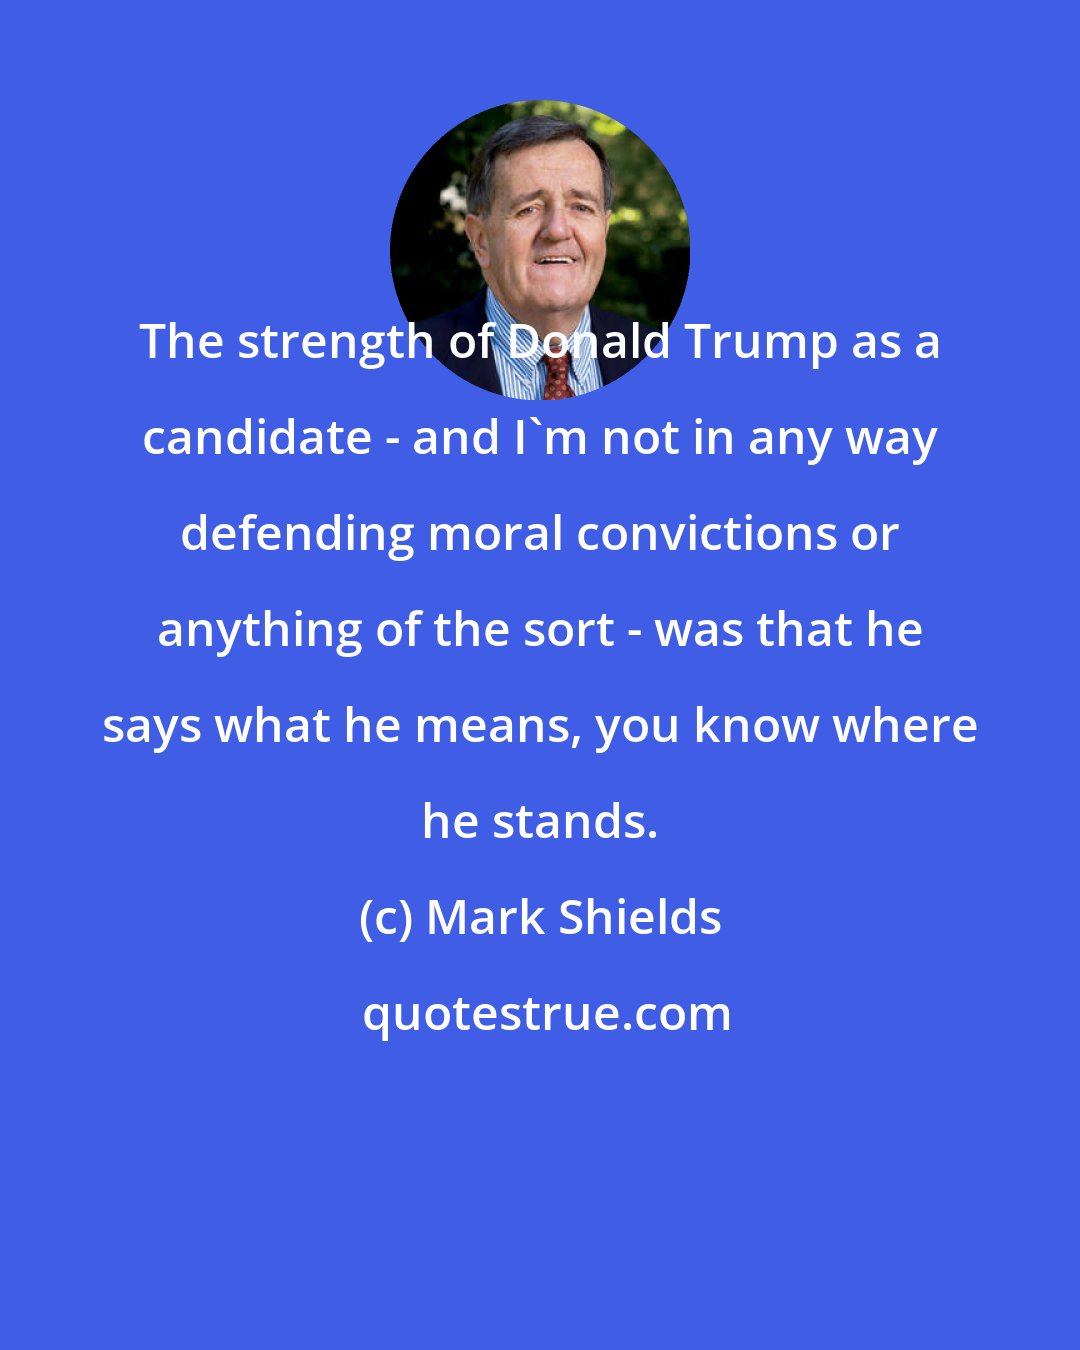 Mark Shields: The strength of Donald Trump as a candidate - and I'm not in any way defending moral convictions or anything of the sort - was that he says what he means, you know where he stands.